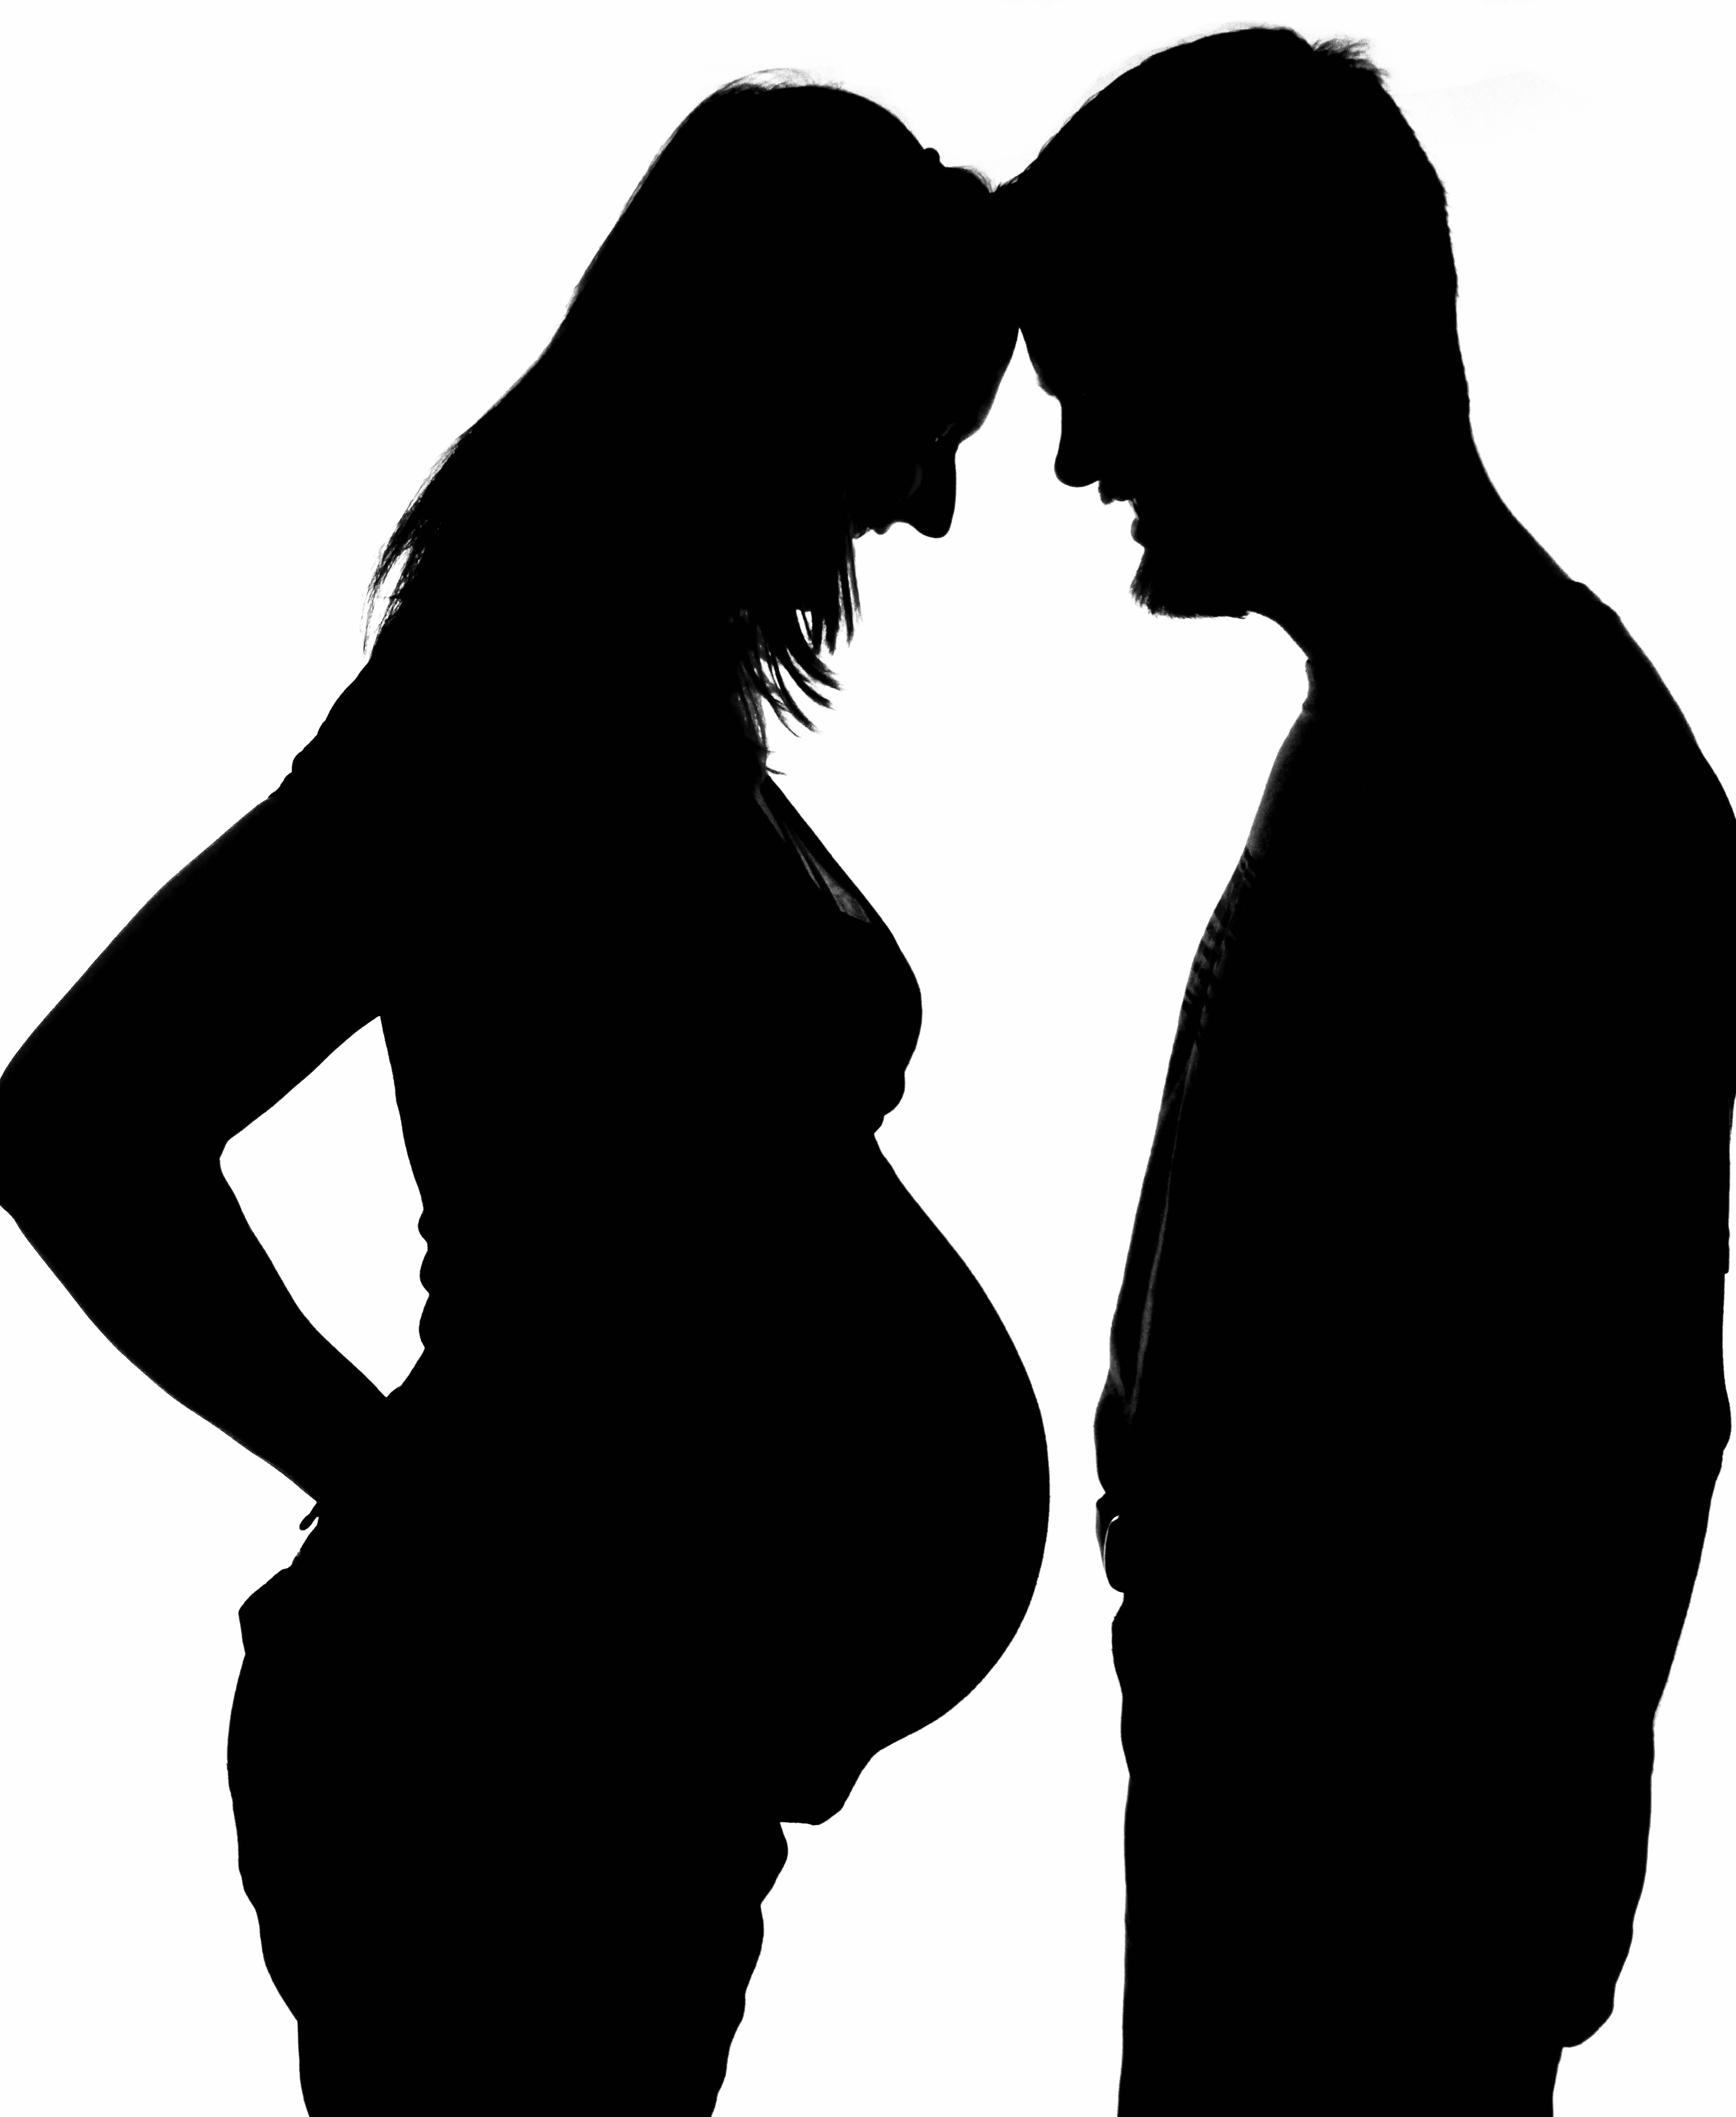 Pregnant mother silhouette clipart